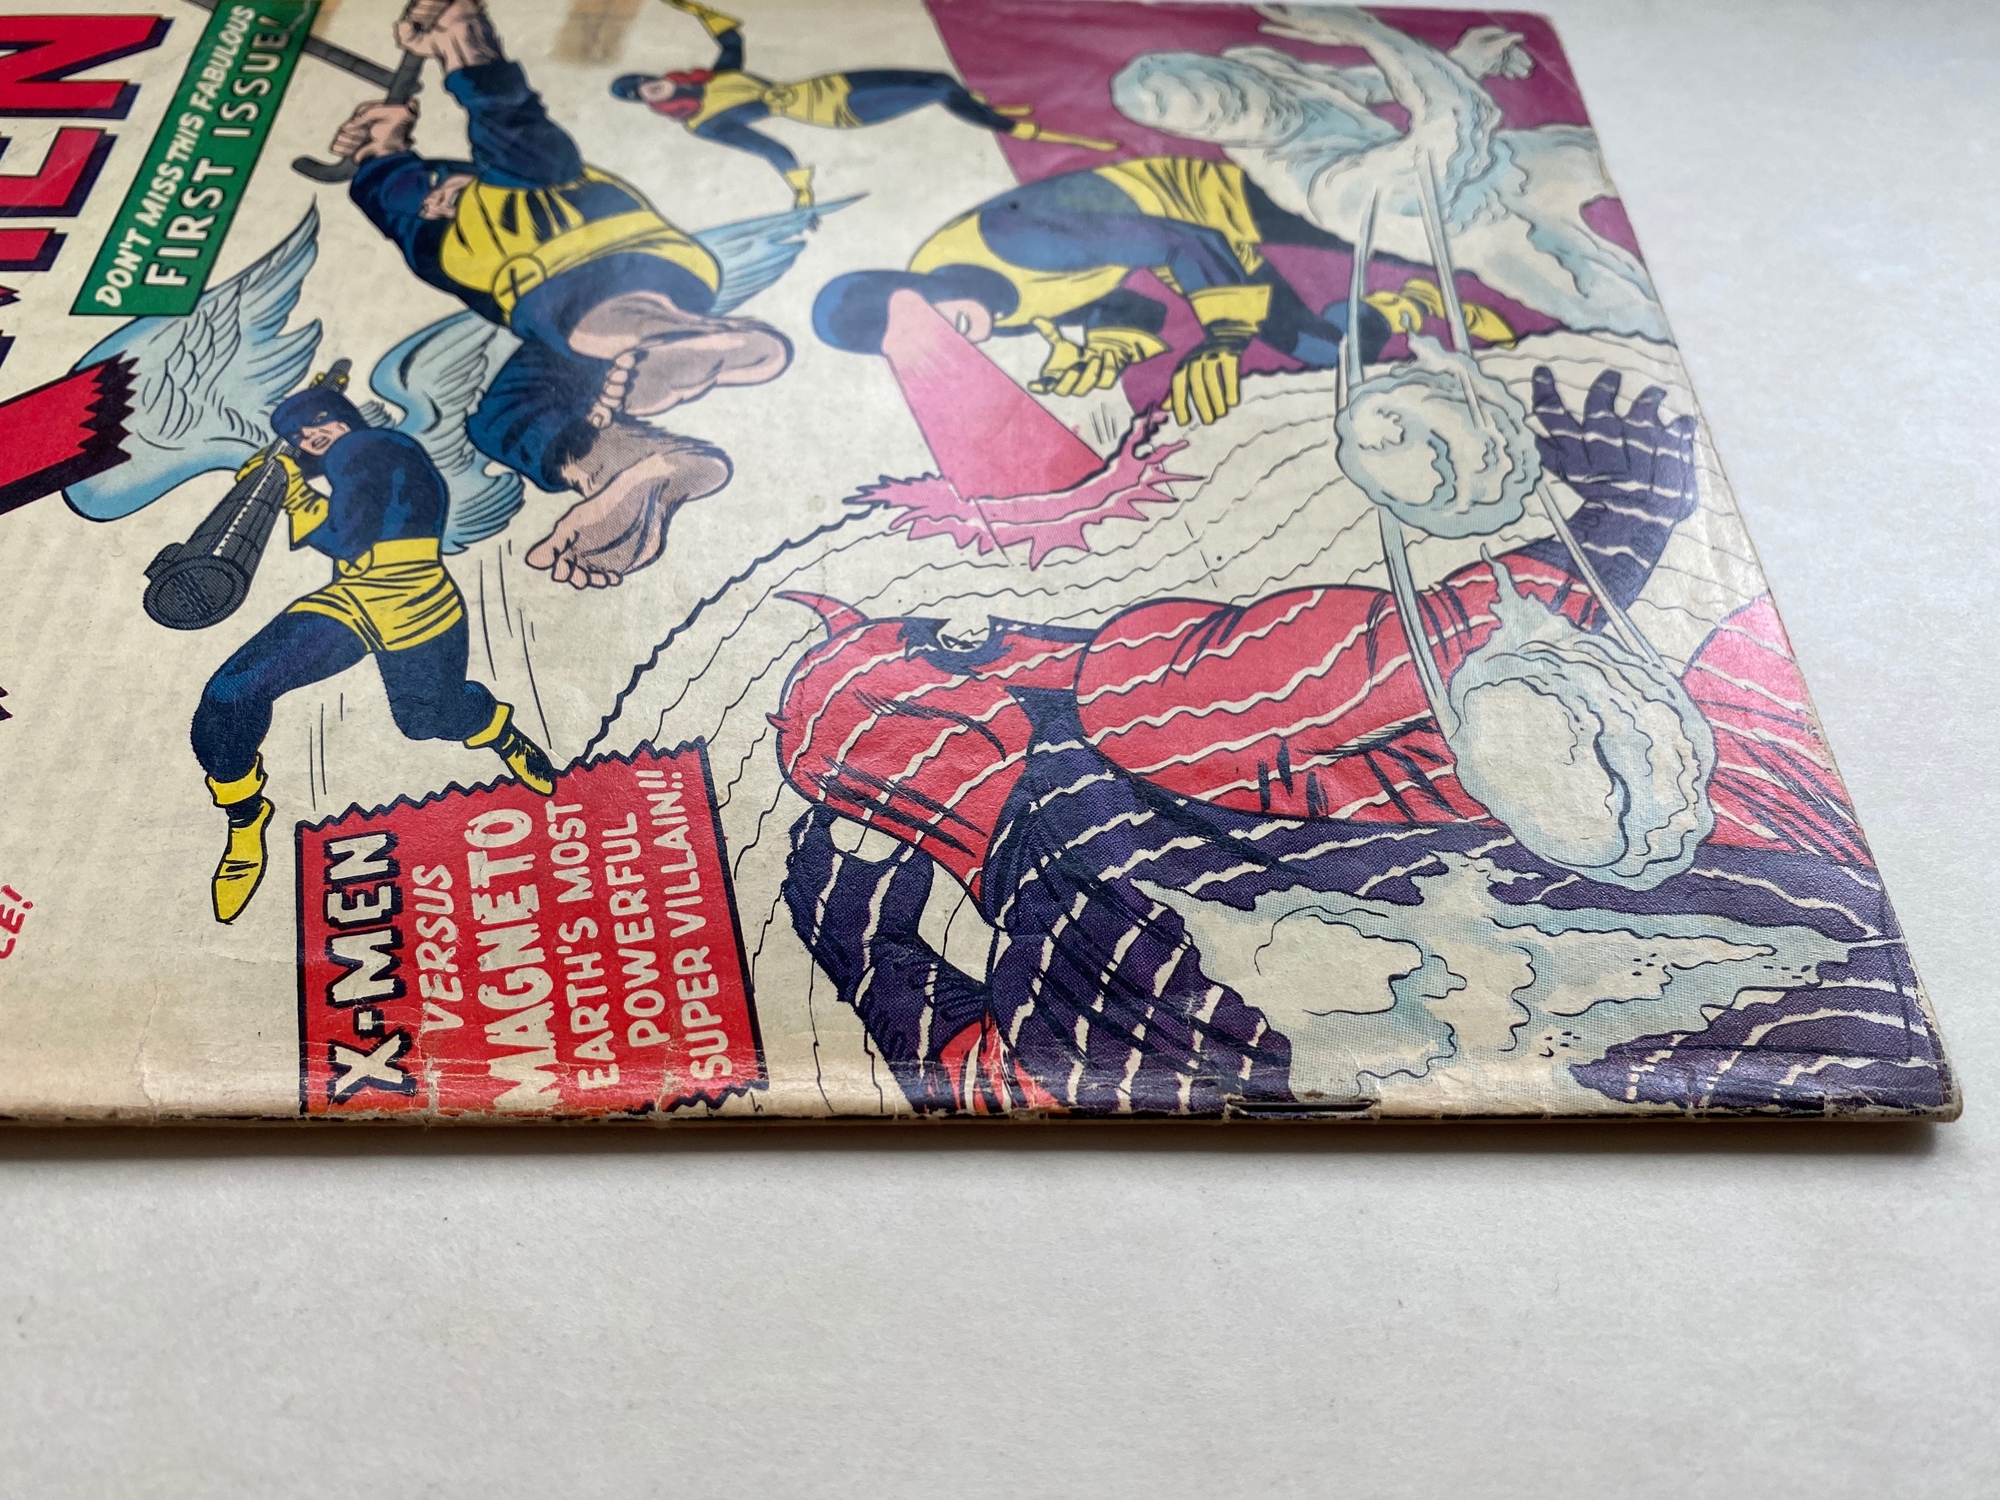 UNCANNY X-MEN #1 - (1963 - MARVEL - Pence Copy) - One of the most important Marvel Silver Age keys - - Image 2 of 9